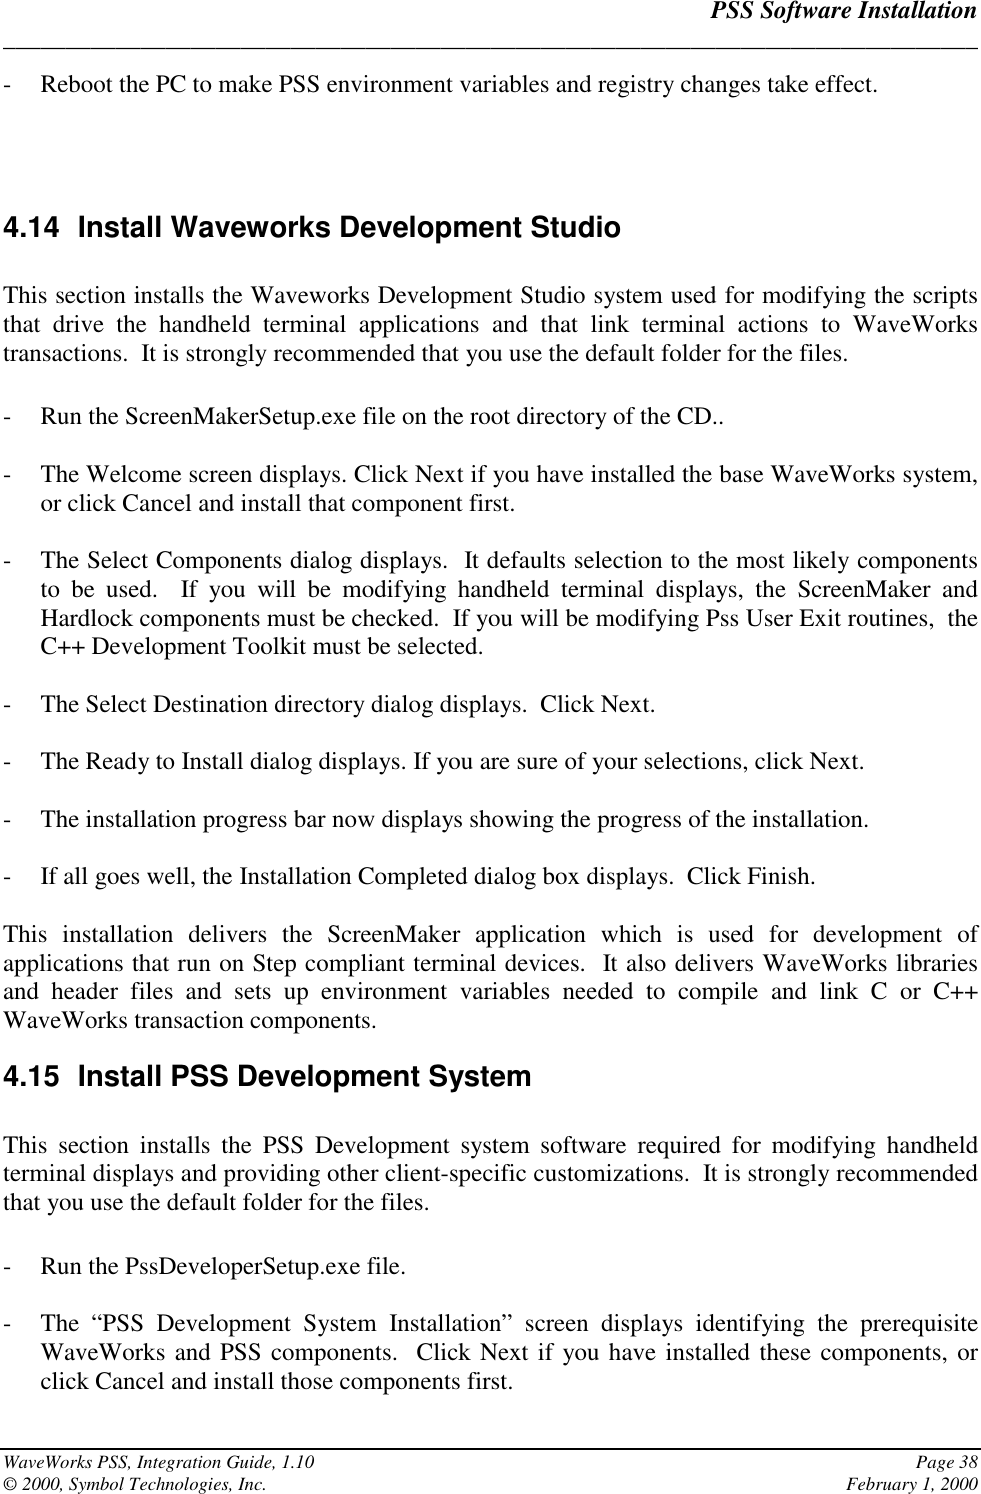 PSS Software Installation______________________________________________________________________________WaveWorks PSS, Integration Guide, 1.10 Page 38© 2000, Symbol Technologies, Inc. February 1, 2000- Reboot the PC to make PSS environment variables and registry changes take effect.4.14  Install Waveworks Development StudioThis section installs the Waveworks Development Studio system used for modifying the scriptsthat drive the handheld terminal applications and that link terminal actions to WaveWorkstransactions.  It is strongly recommended that you use the default folder for the files.- Run the ScreenMakerSetup.exe file on the root directory of the CD..- The Welcome screen displays. Click Next if you have installed the base WaveWorks system,or click Cancel and install that component first.- The Select Components dialog displays.  It defaults selection to the most likely componentsto be used.  If you will be modifying handheld terminal displays, the ScreenMaker andHardlock components must be checked.  If you will be modifying Pss User Exit routines,  theC++ Development Toolkit must be selected.- The Select Destination directory dialog displays.  Click Next.- The Ready to Install dialog displays. If you are sure of your selections, click Next.- The installation progress bar now displays showing the progress of the installation.- If all goes well, the Installation Completed dialog box displays.  Click Finish.This installation delivers the ScreenMaker application which is used for development ofapplications that run on Step compliant terminal devices.  It also delivers WaveWorks librariesand header files and sets up environment variables needed to compile and link C or C++WaveWorks transaction components.4.15  Install PSS Development SystemThis section installs the PSS Development system software required for modifying handheldterminal displays and providing other client-specific customizations.  It is strongly recommendedthat you use the default folder for the files.- Run the PssDeveloperSetup.exe file.- The “PSS Development System Installation” screen displays identifying the prerequisiteWaveWorks and PSS components.  Click Next if you have installed these components, orclick Cancel and install those components first.